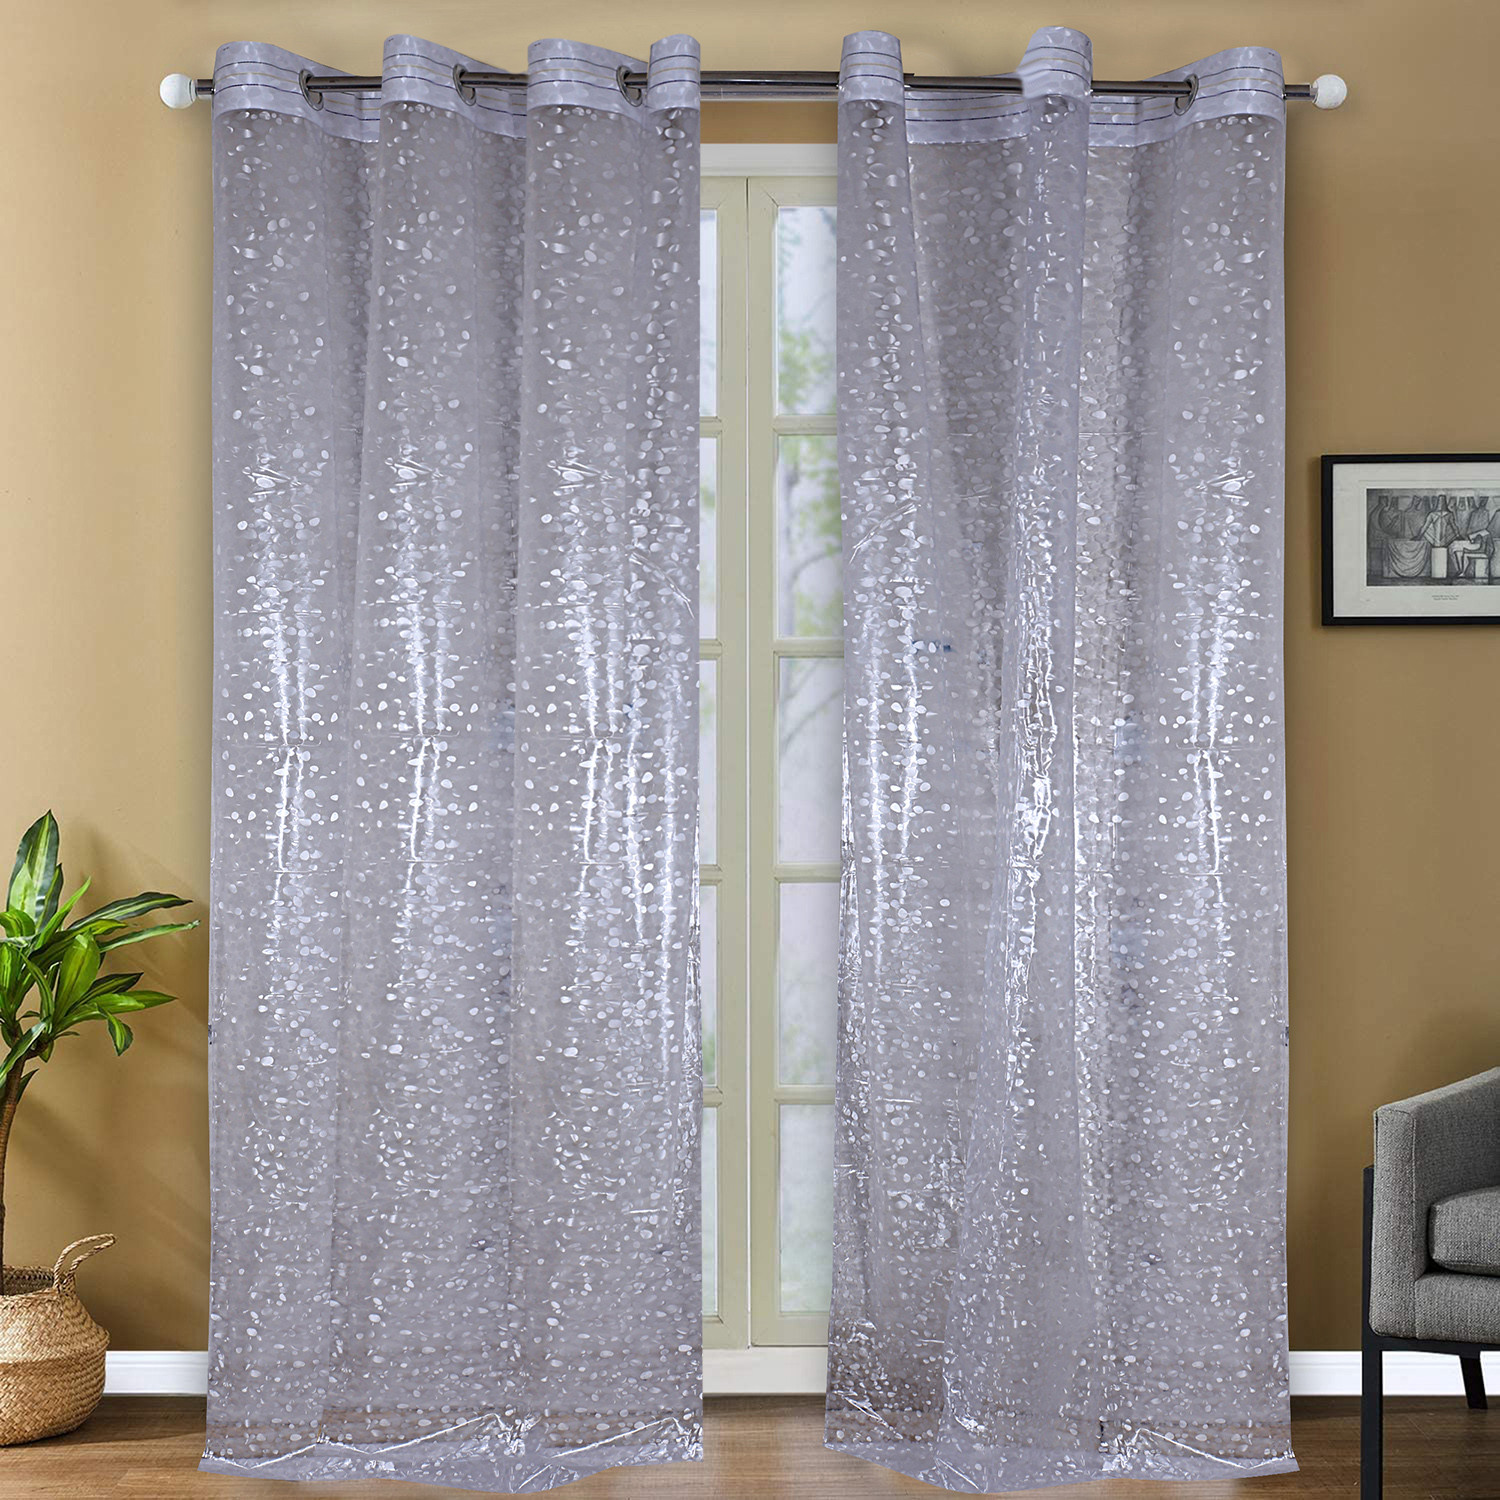 Kuber Industries Stone Print Stain-Resistant & Waterproof PVC AC Curtain For Home, office, restaurant 8 Feet With 6 Grommets (Transparent)